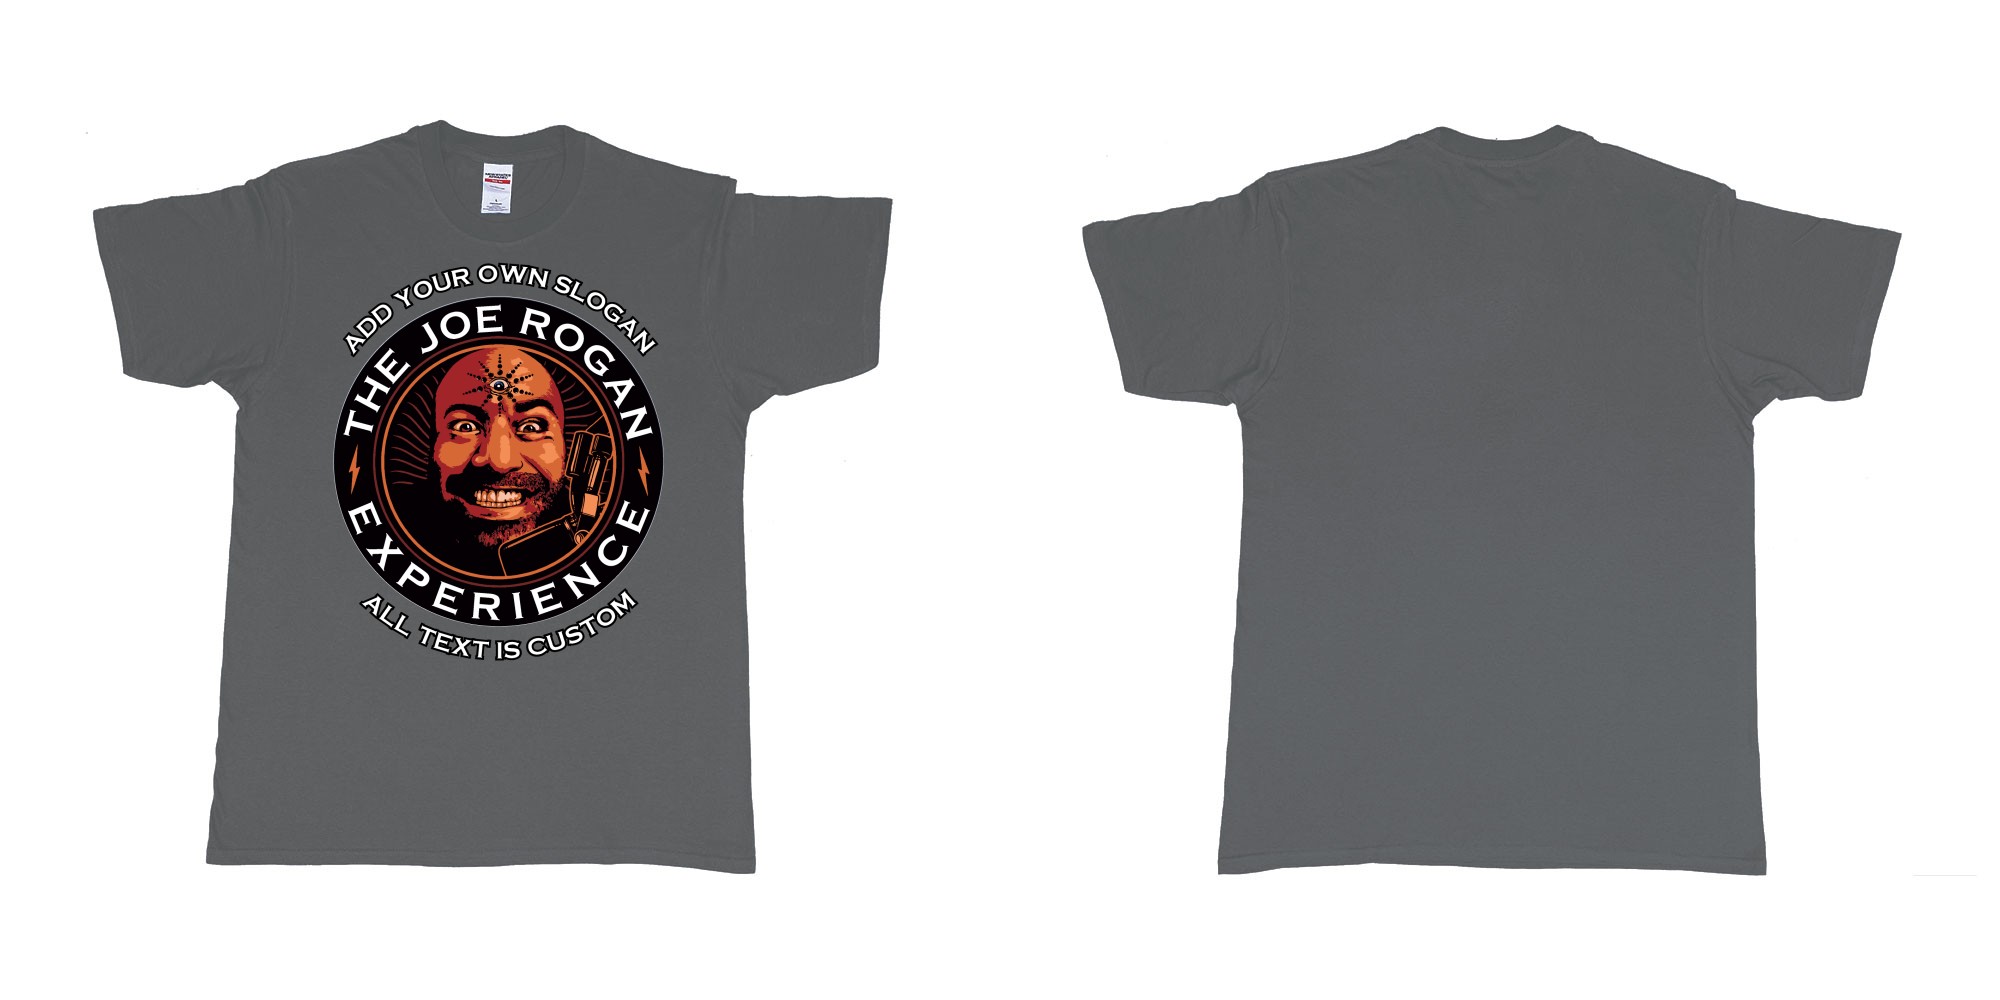 Custom tshirt design the joe rogan experience custom tshirt in fabric color charcoal choice your own text made in Bali by The Pirate Way